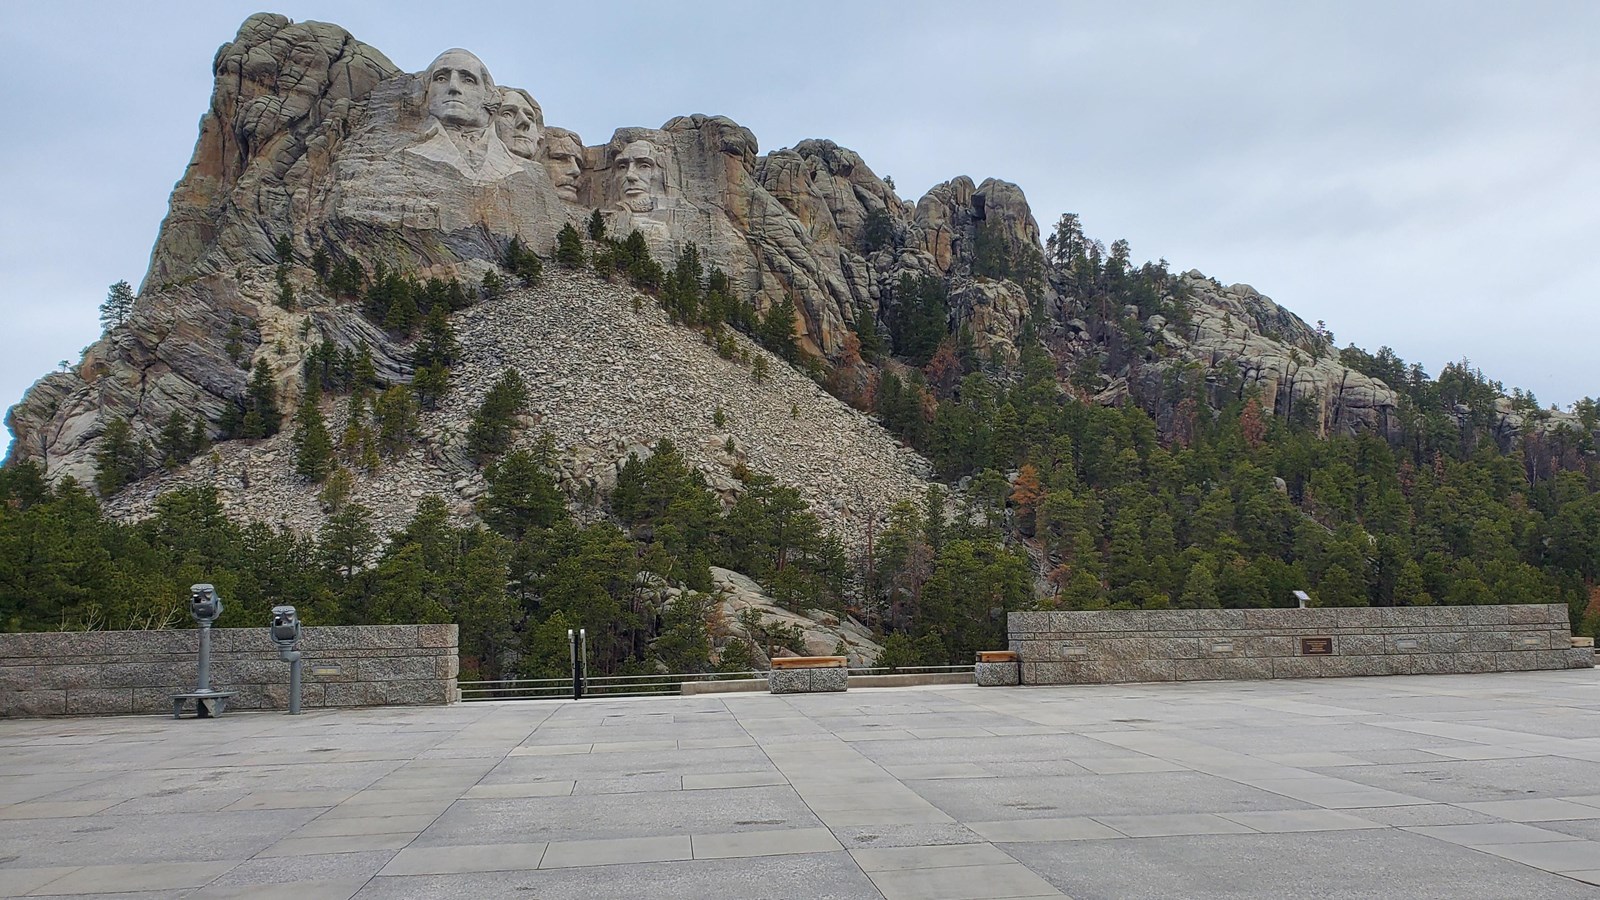 Photo of the concrete surface of the Grand View Terrace and Mount Rushmore.